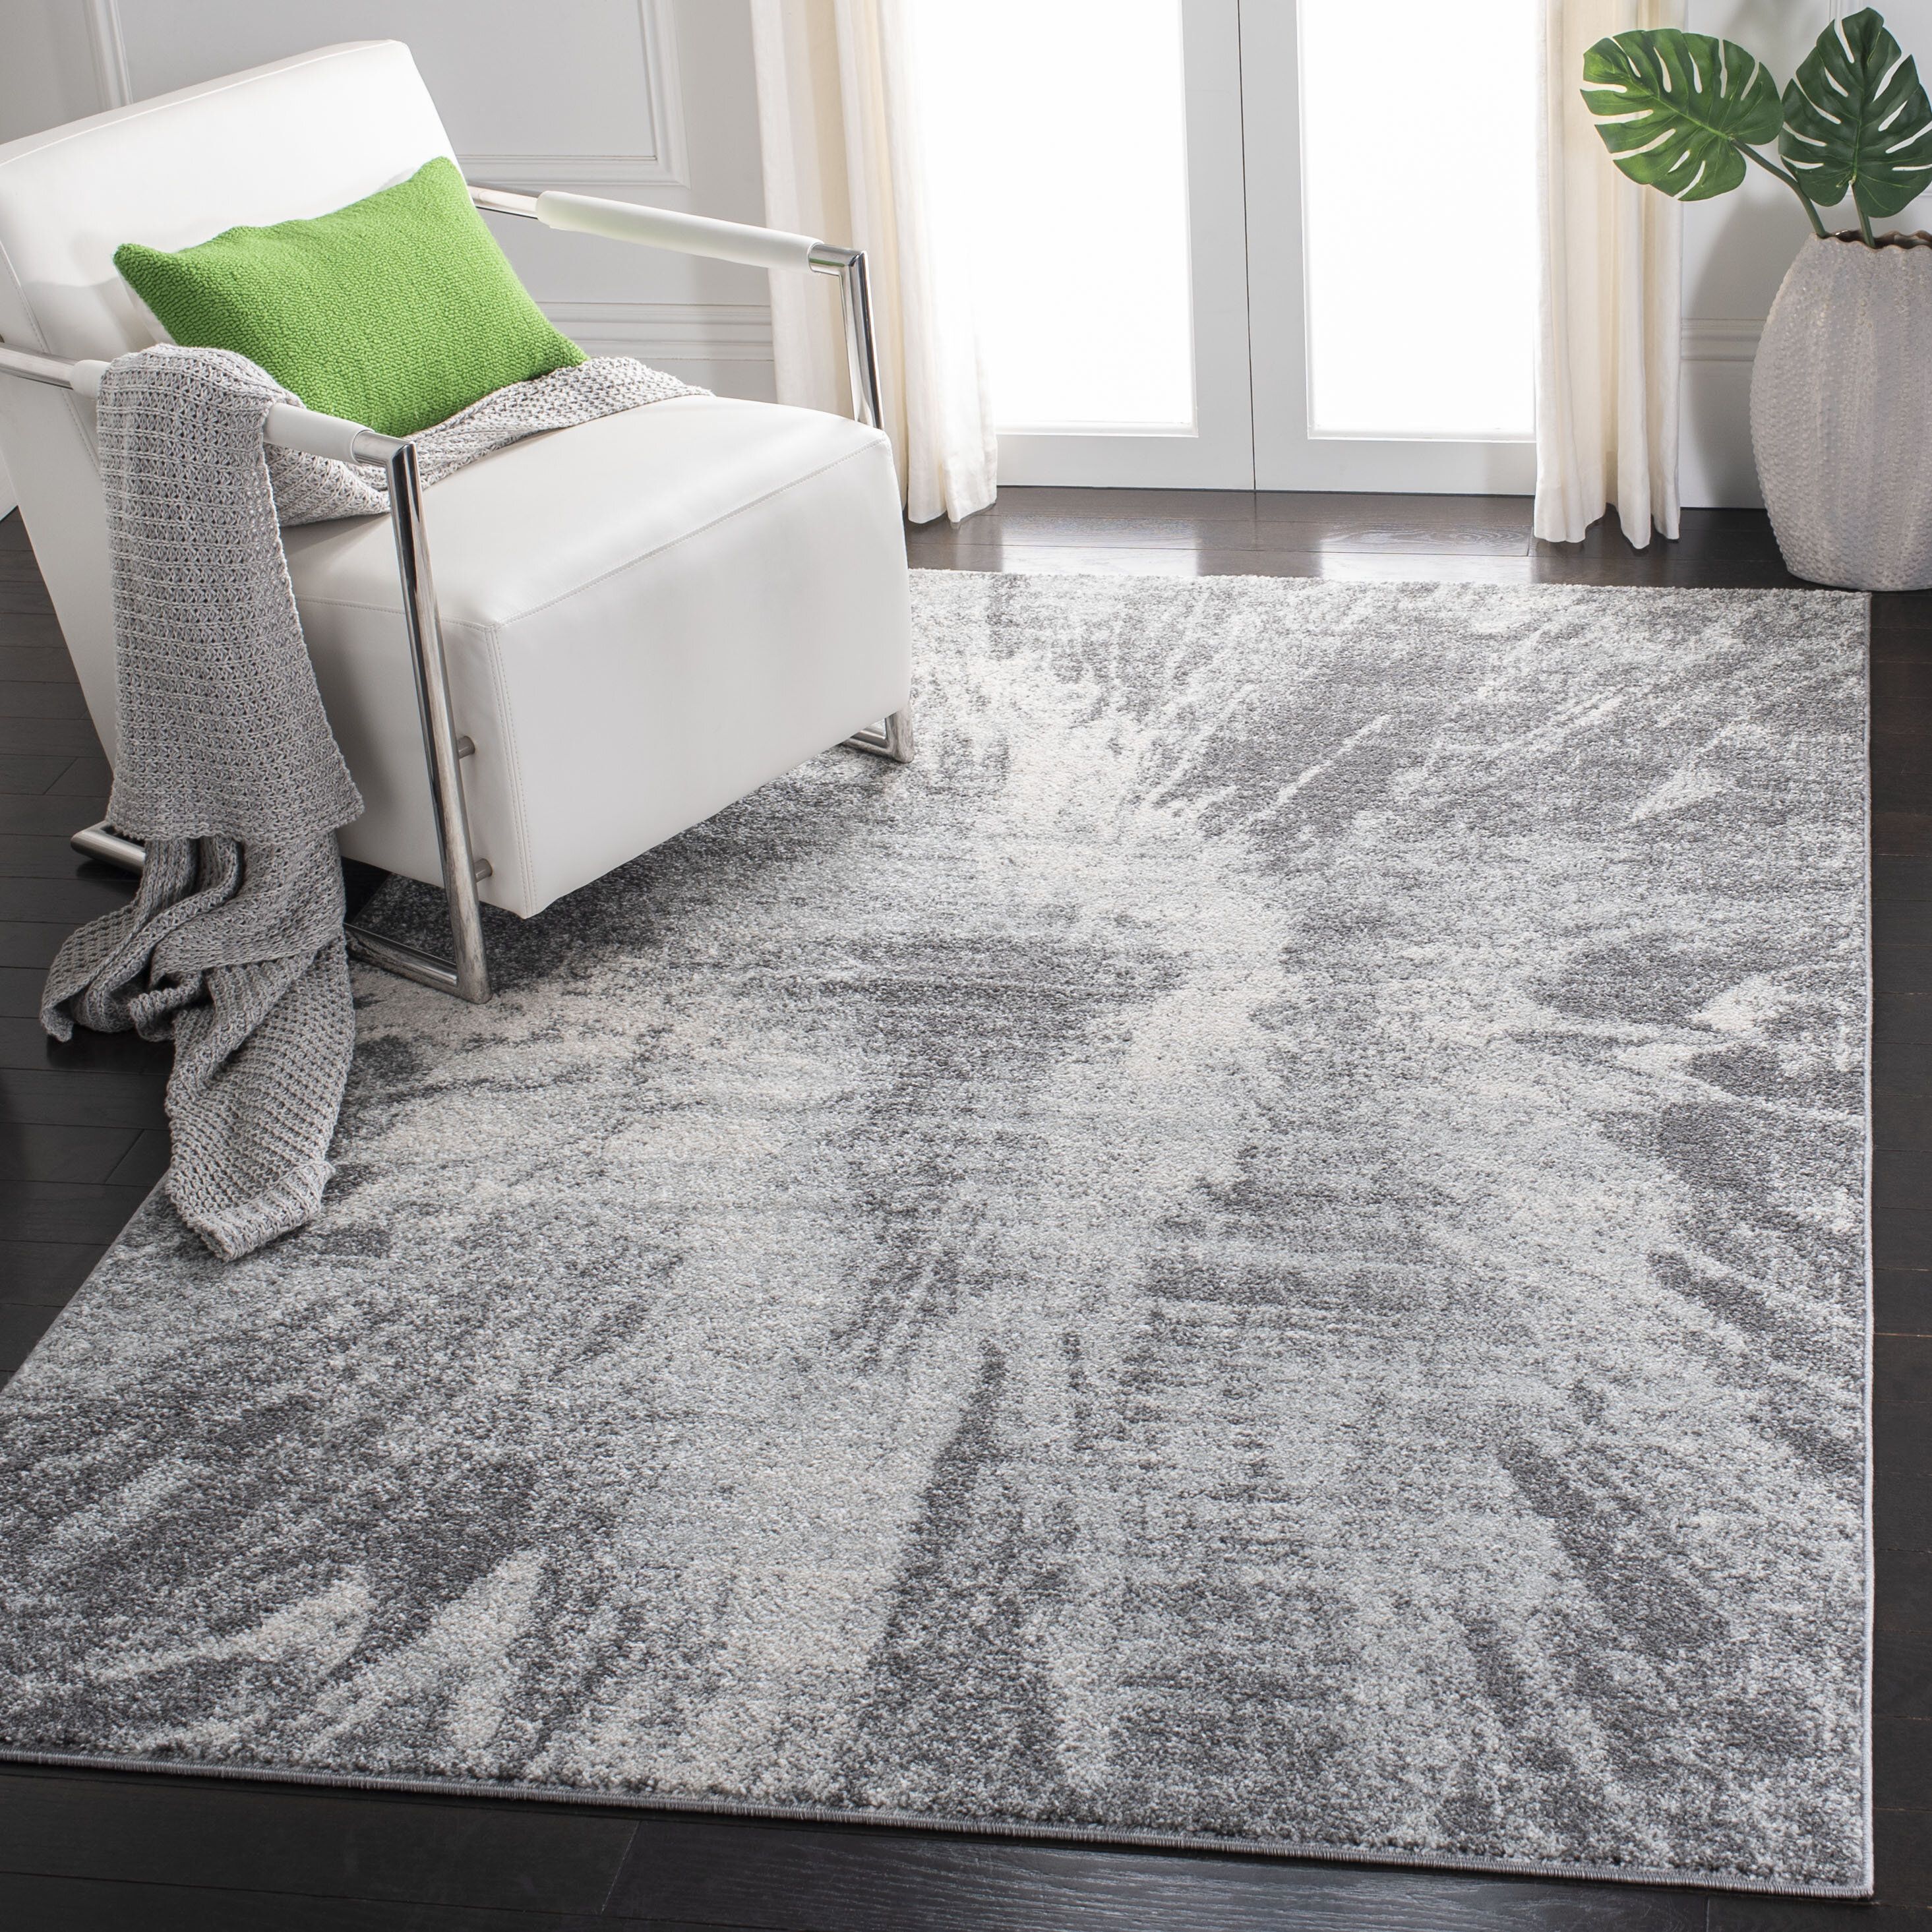 17 Stories Dominic Performance Ivory/gray Rug & Reviews | Wayfair In Gray Rugs (View 3 of 15)